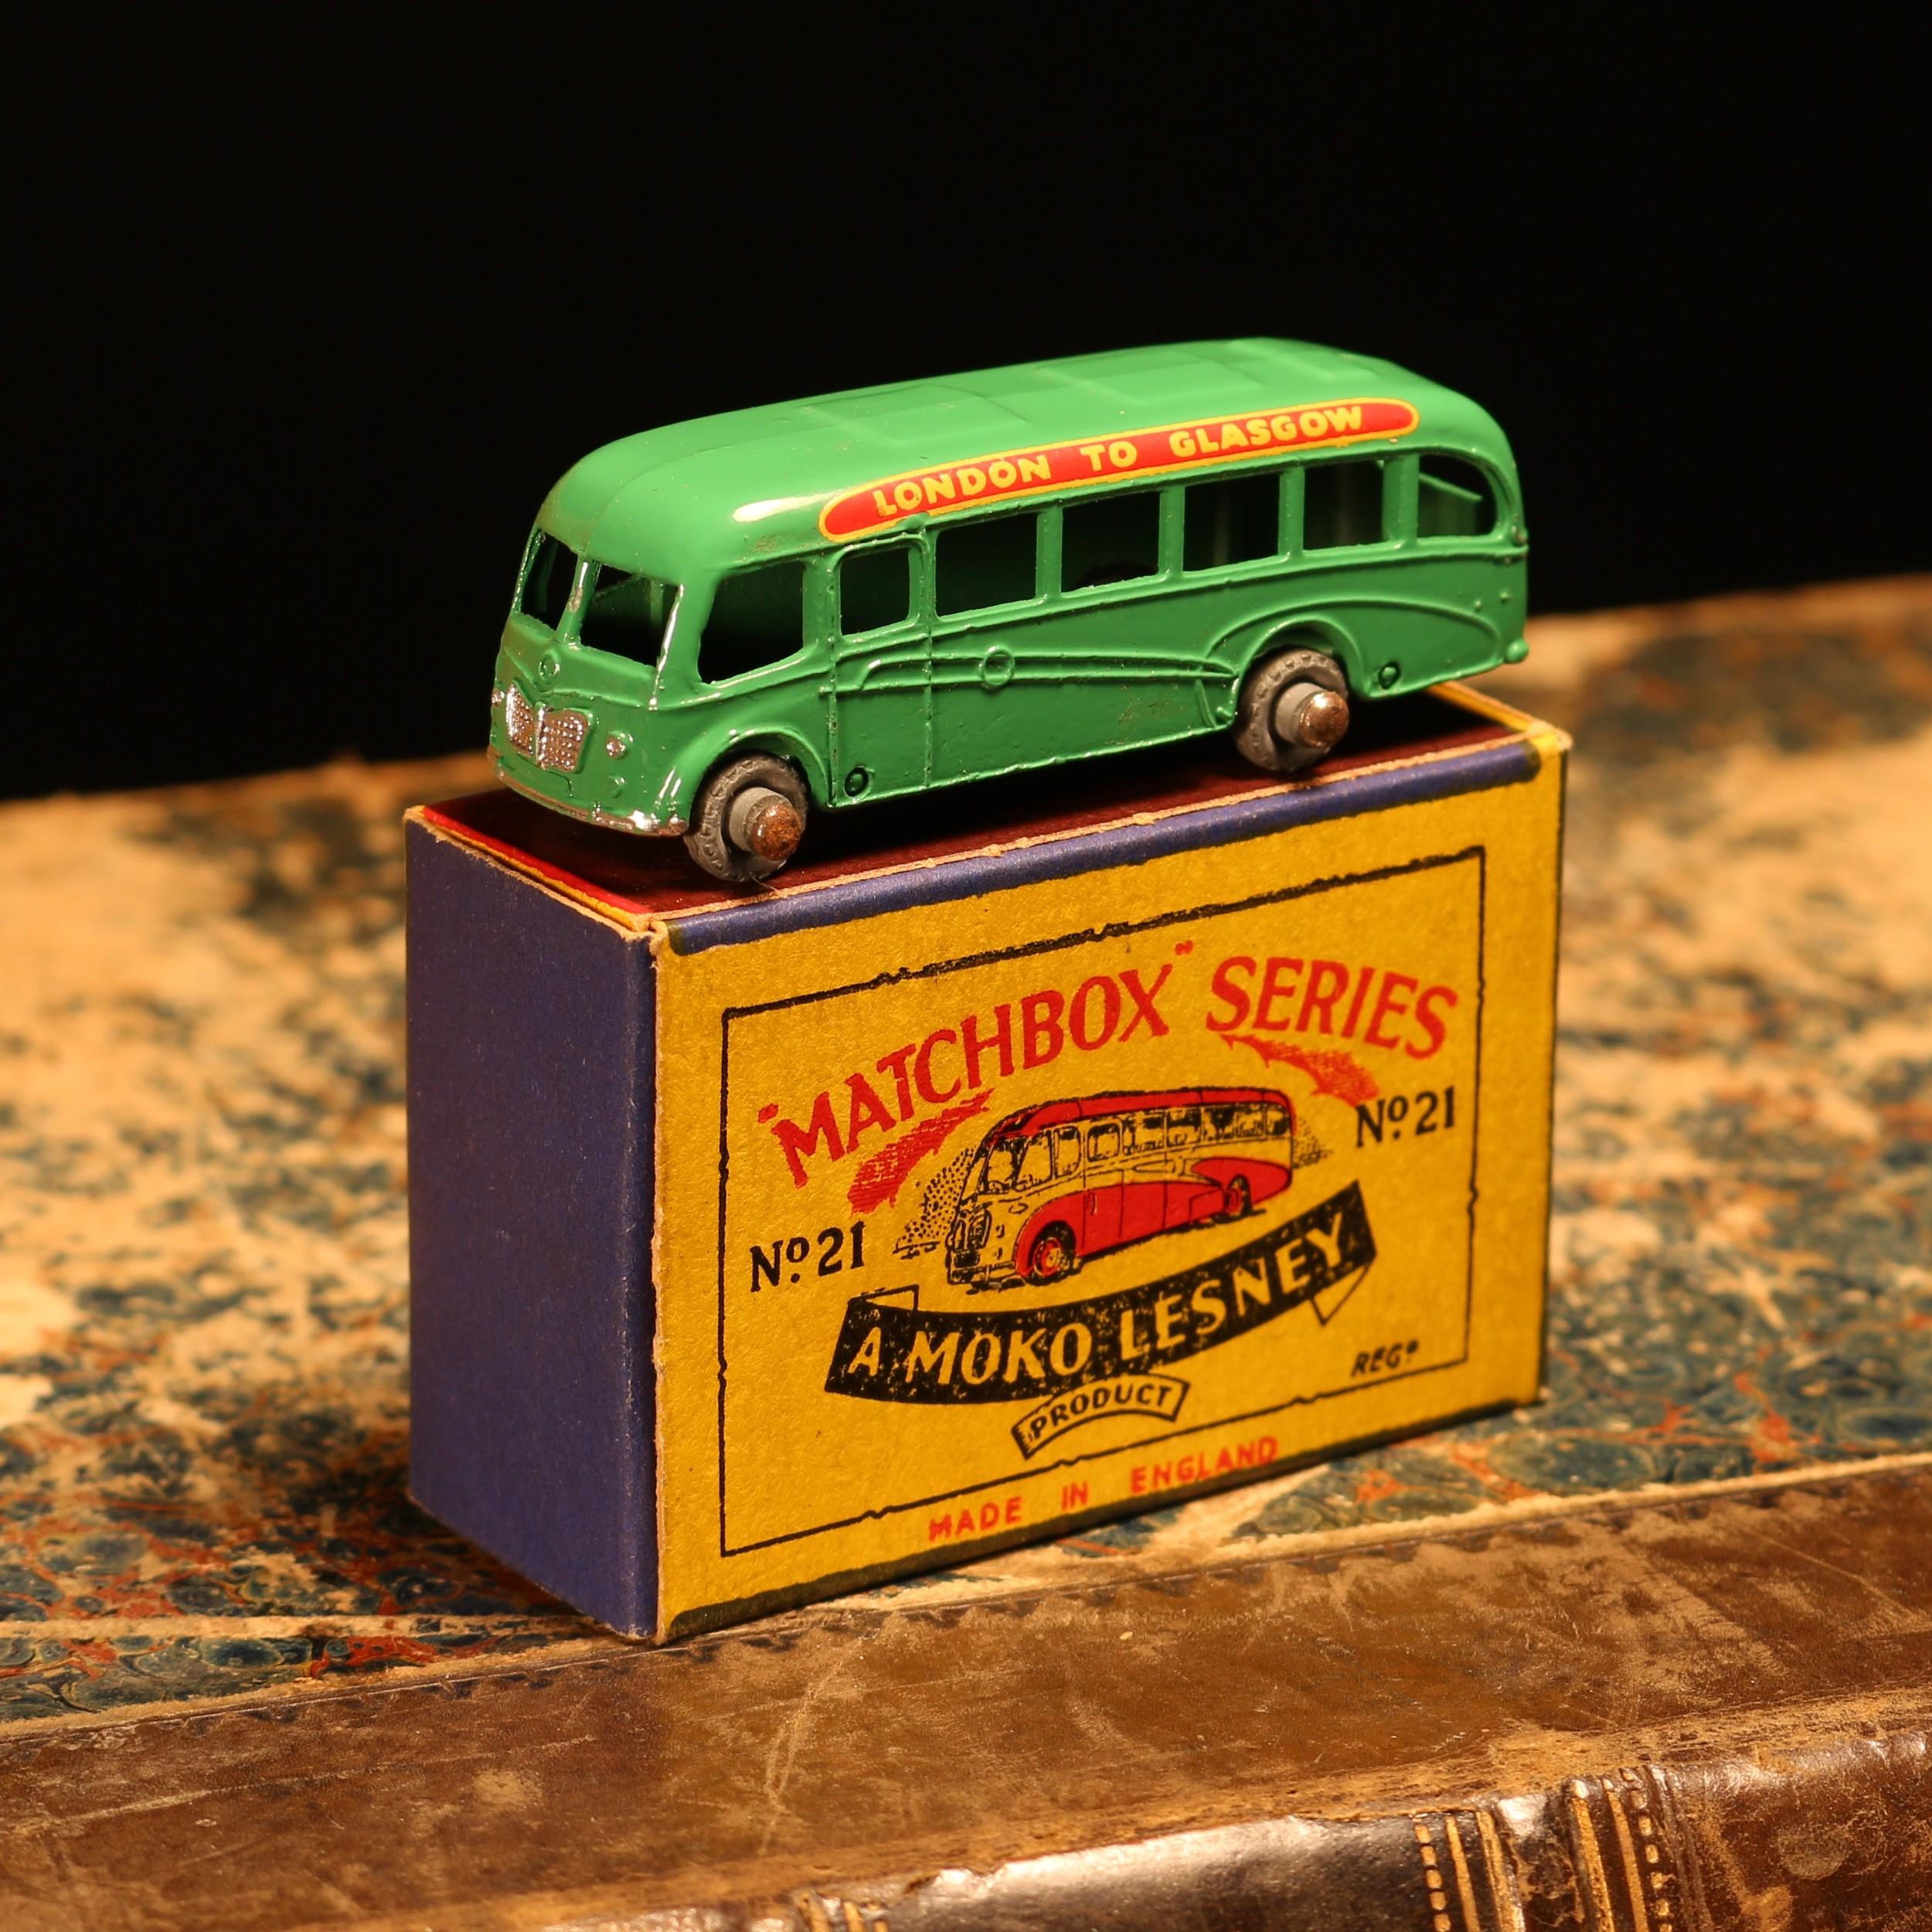 Matchbox '1-75' series diecast model 21a Bedford coach, green body and base, red and yellow '